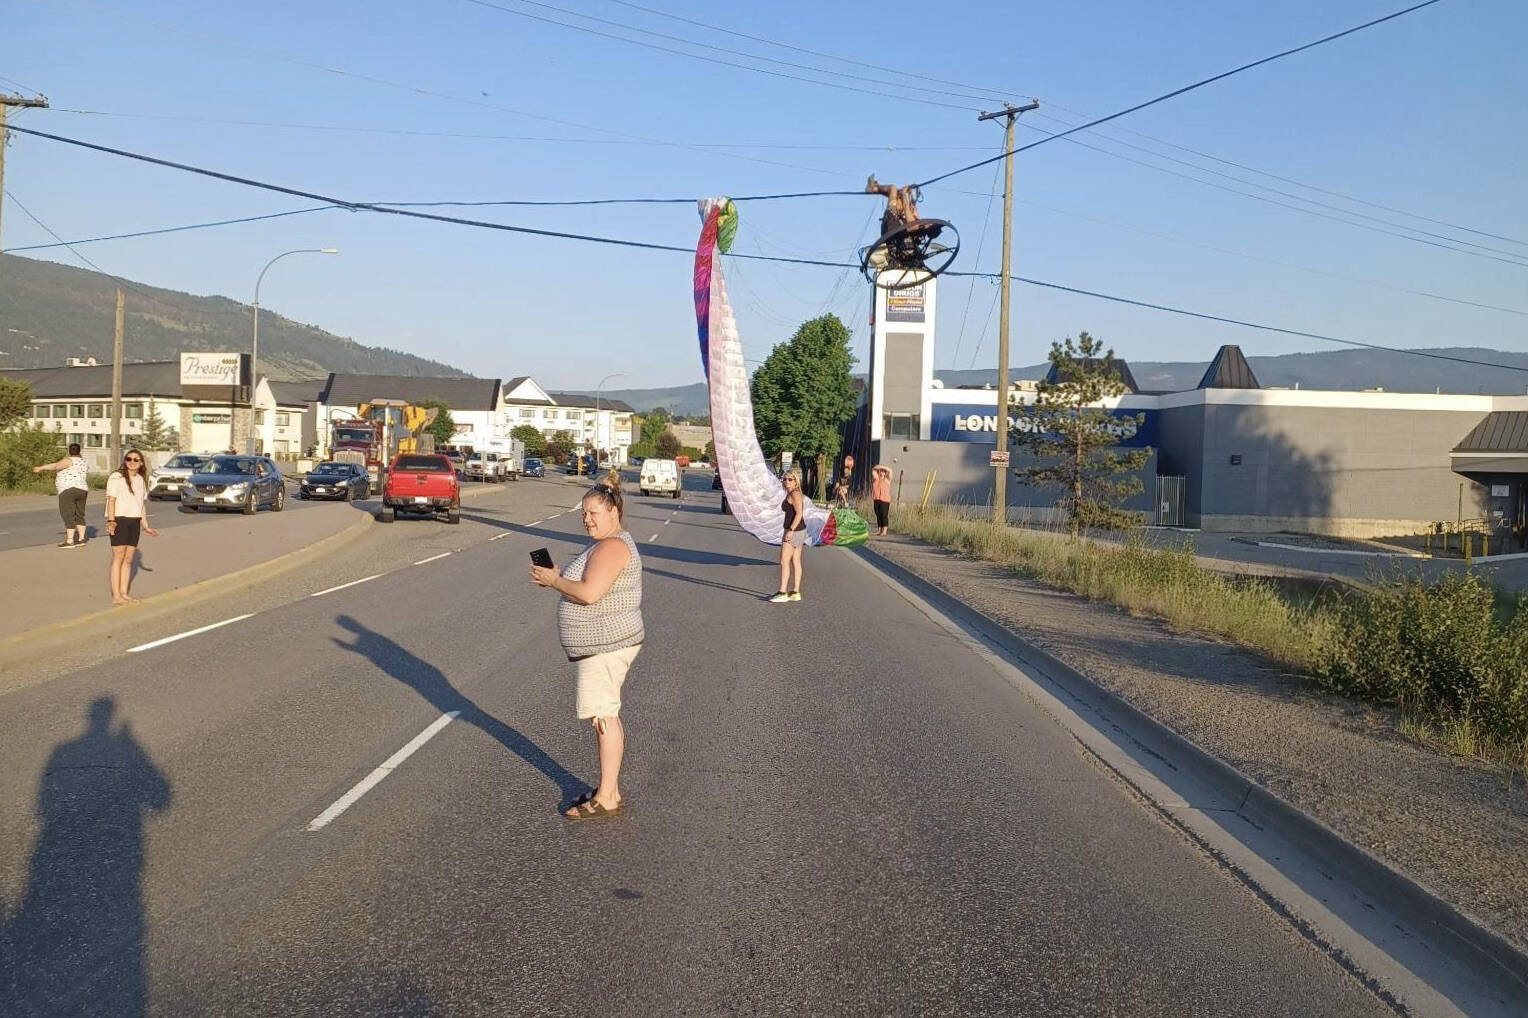 The pilot of a power parachute made an unexpected landing in Vernon, getting tangled in telephone wires above Highway 97 near London Drugs Friday, June 2, 2023. The highway is closed southbound while crews attend to the incident. (Submitted photo)